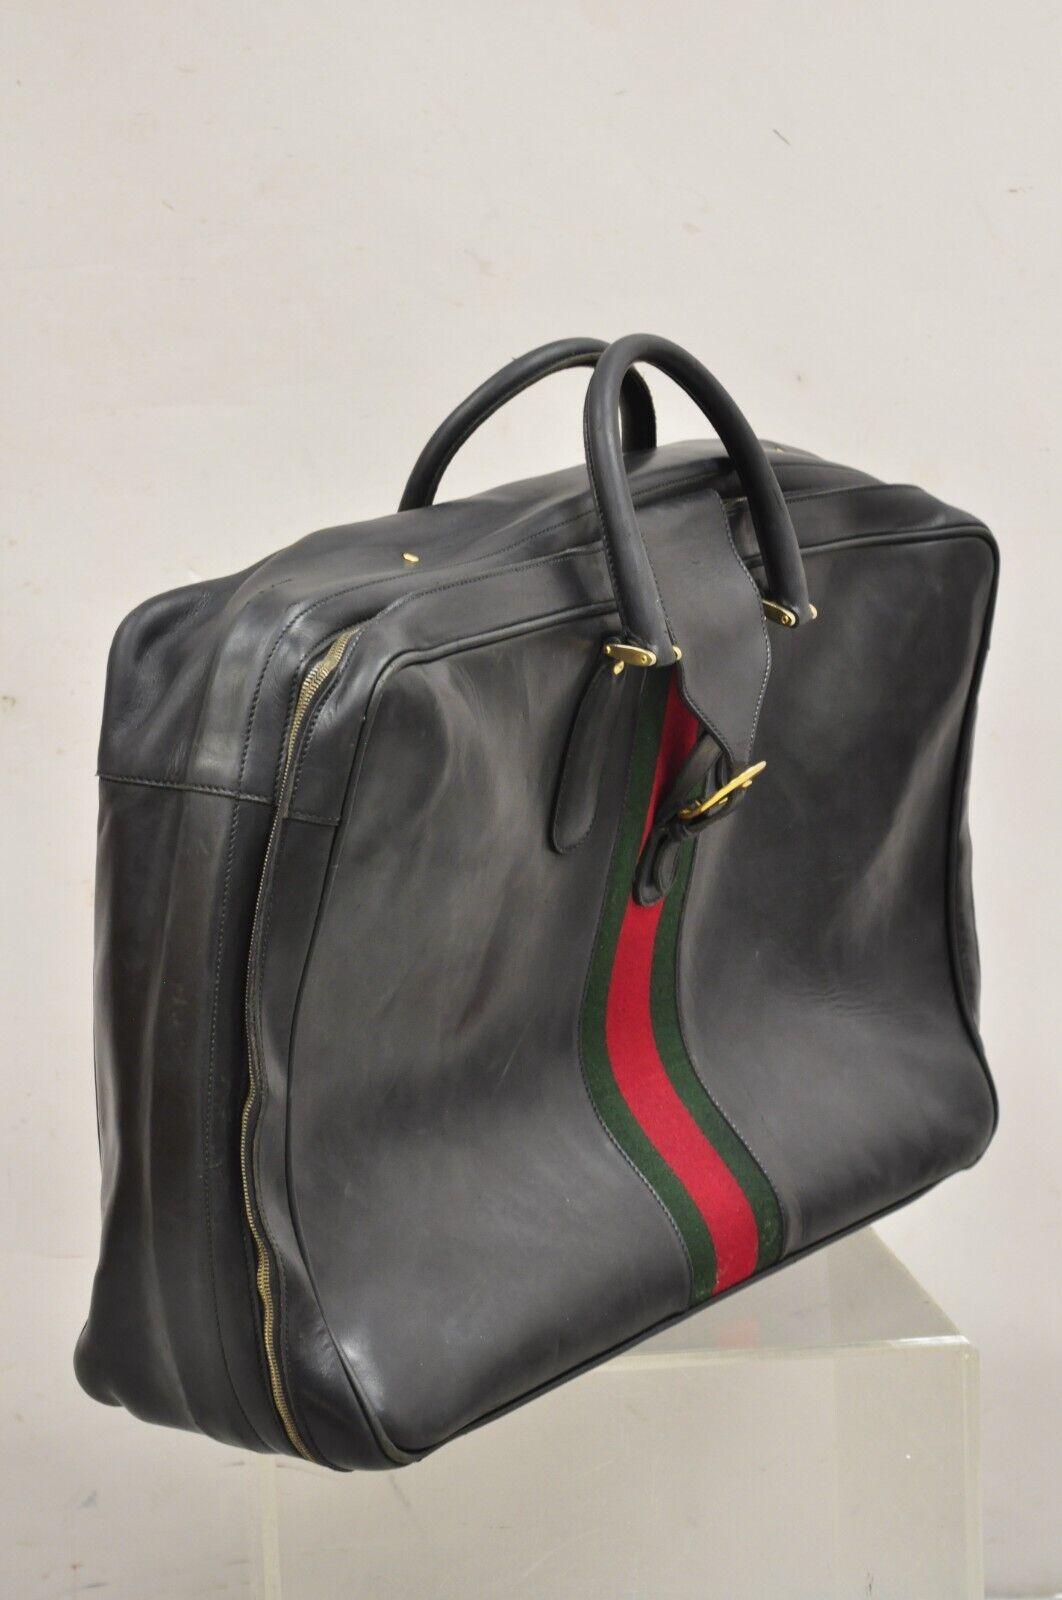 Vintage Gucci Large Black Leather Suitcase Luggage Travel Bag Green Red Webbing For Sale 7